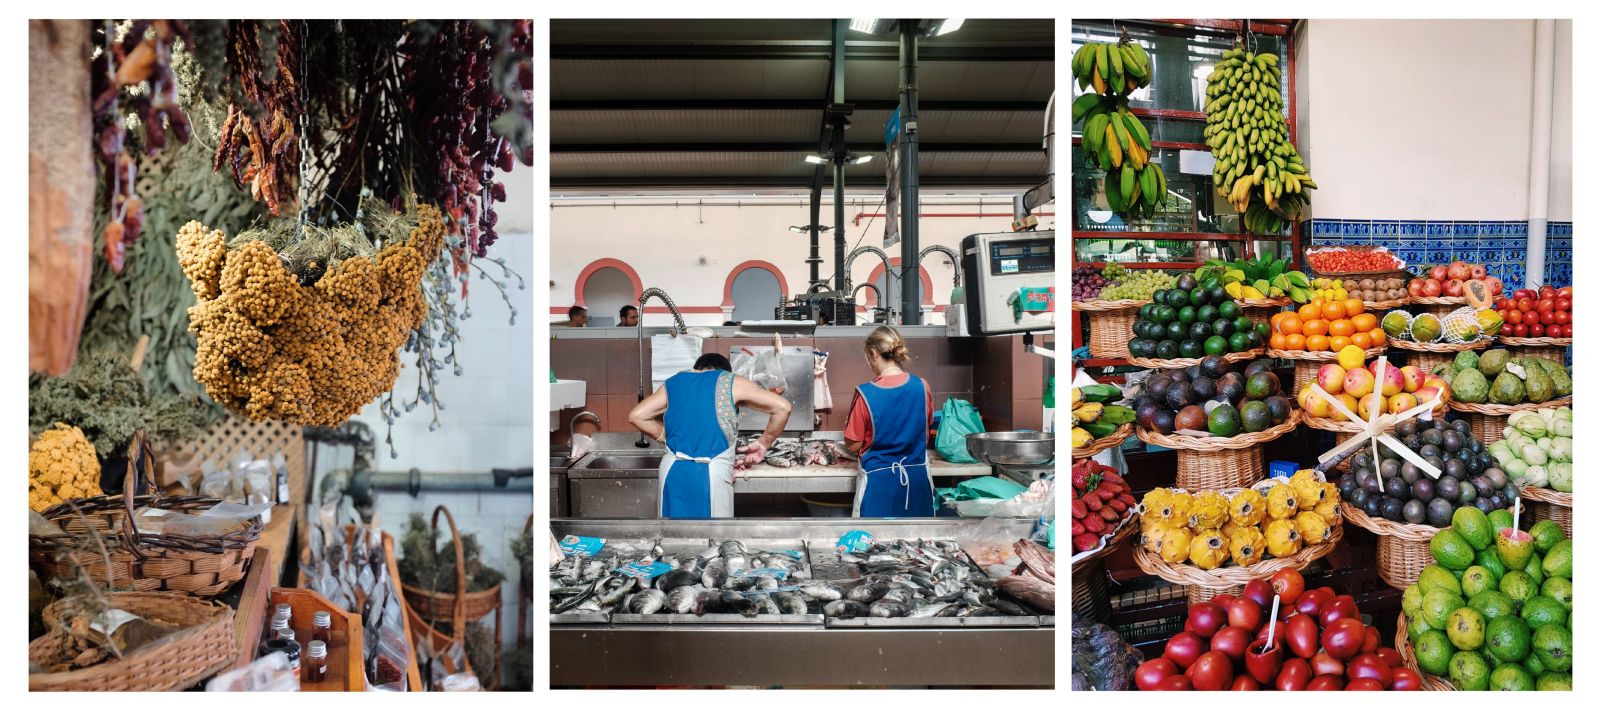 Food, fish and herbal markets in Portugal.